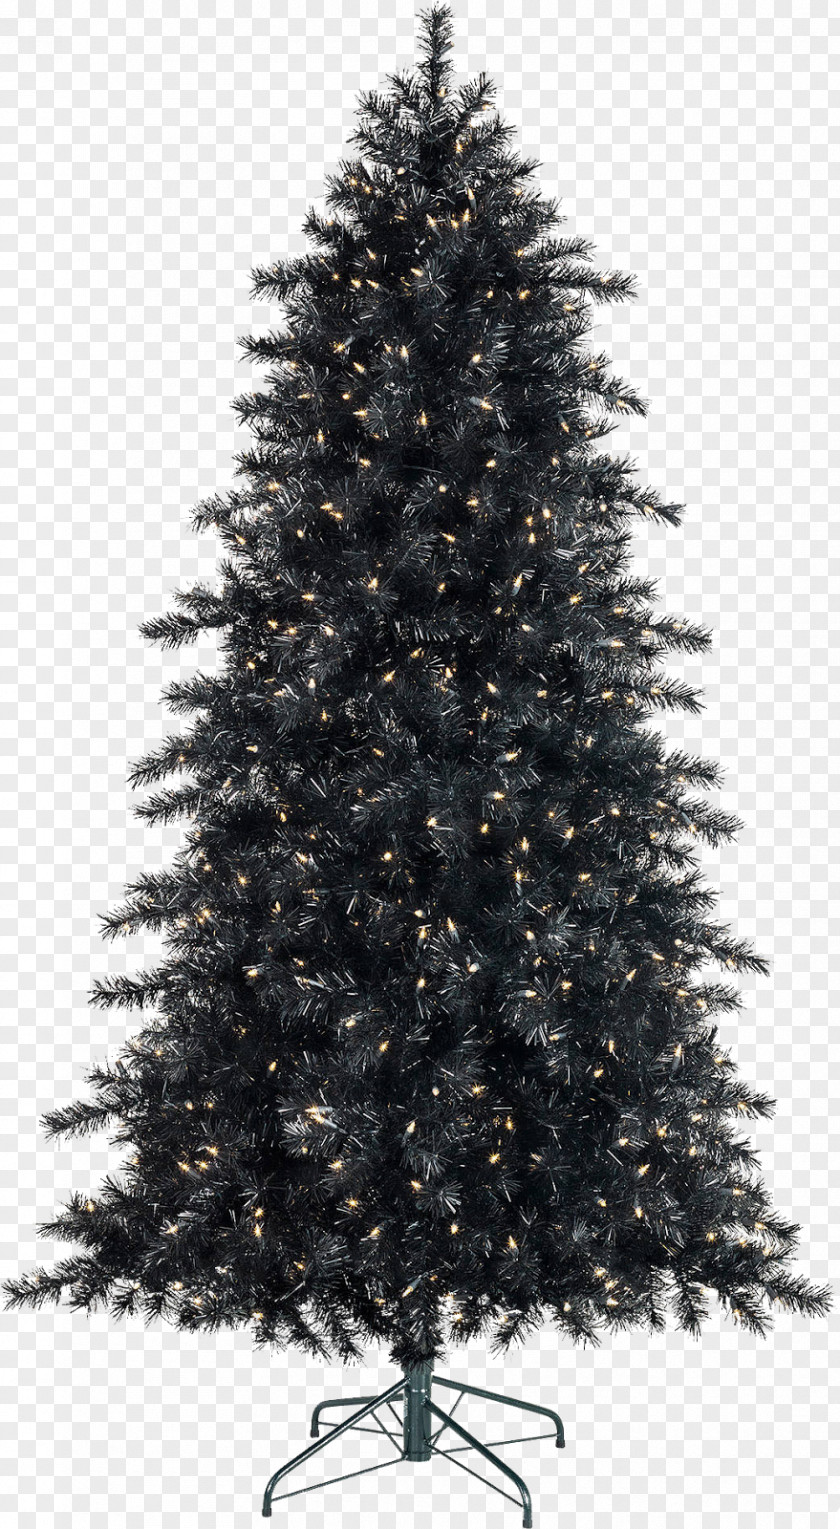 Christmas Tree Artificial Decoration Ornament PNG